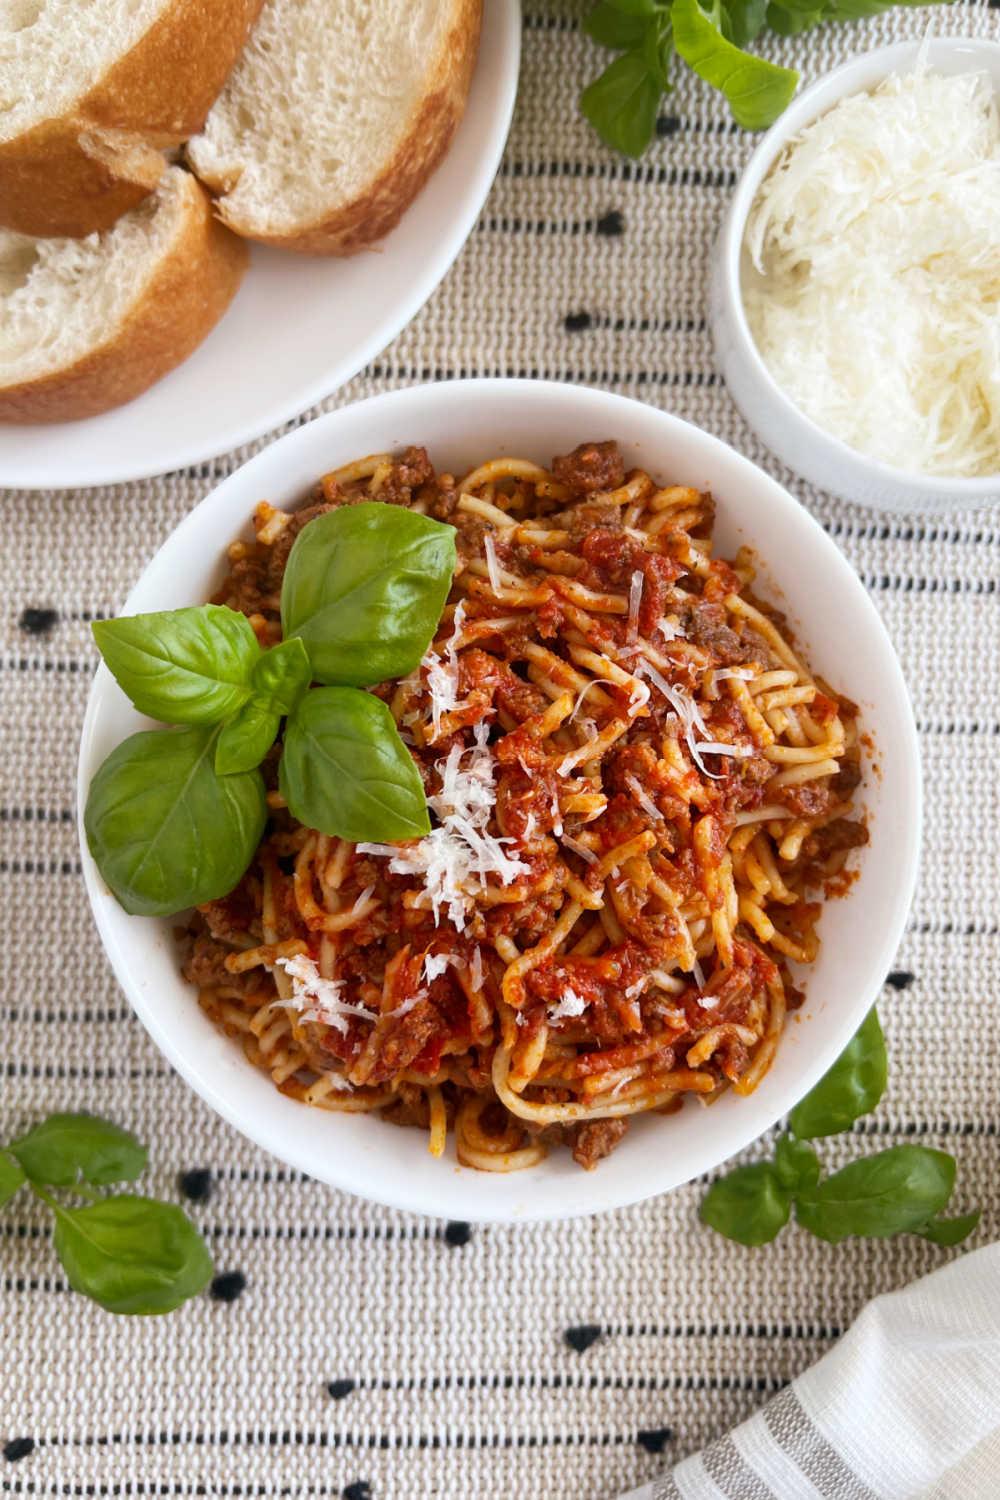 instant pot spaghetti and meat sauce in white bowl with basil, Parmesan cheese and bread